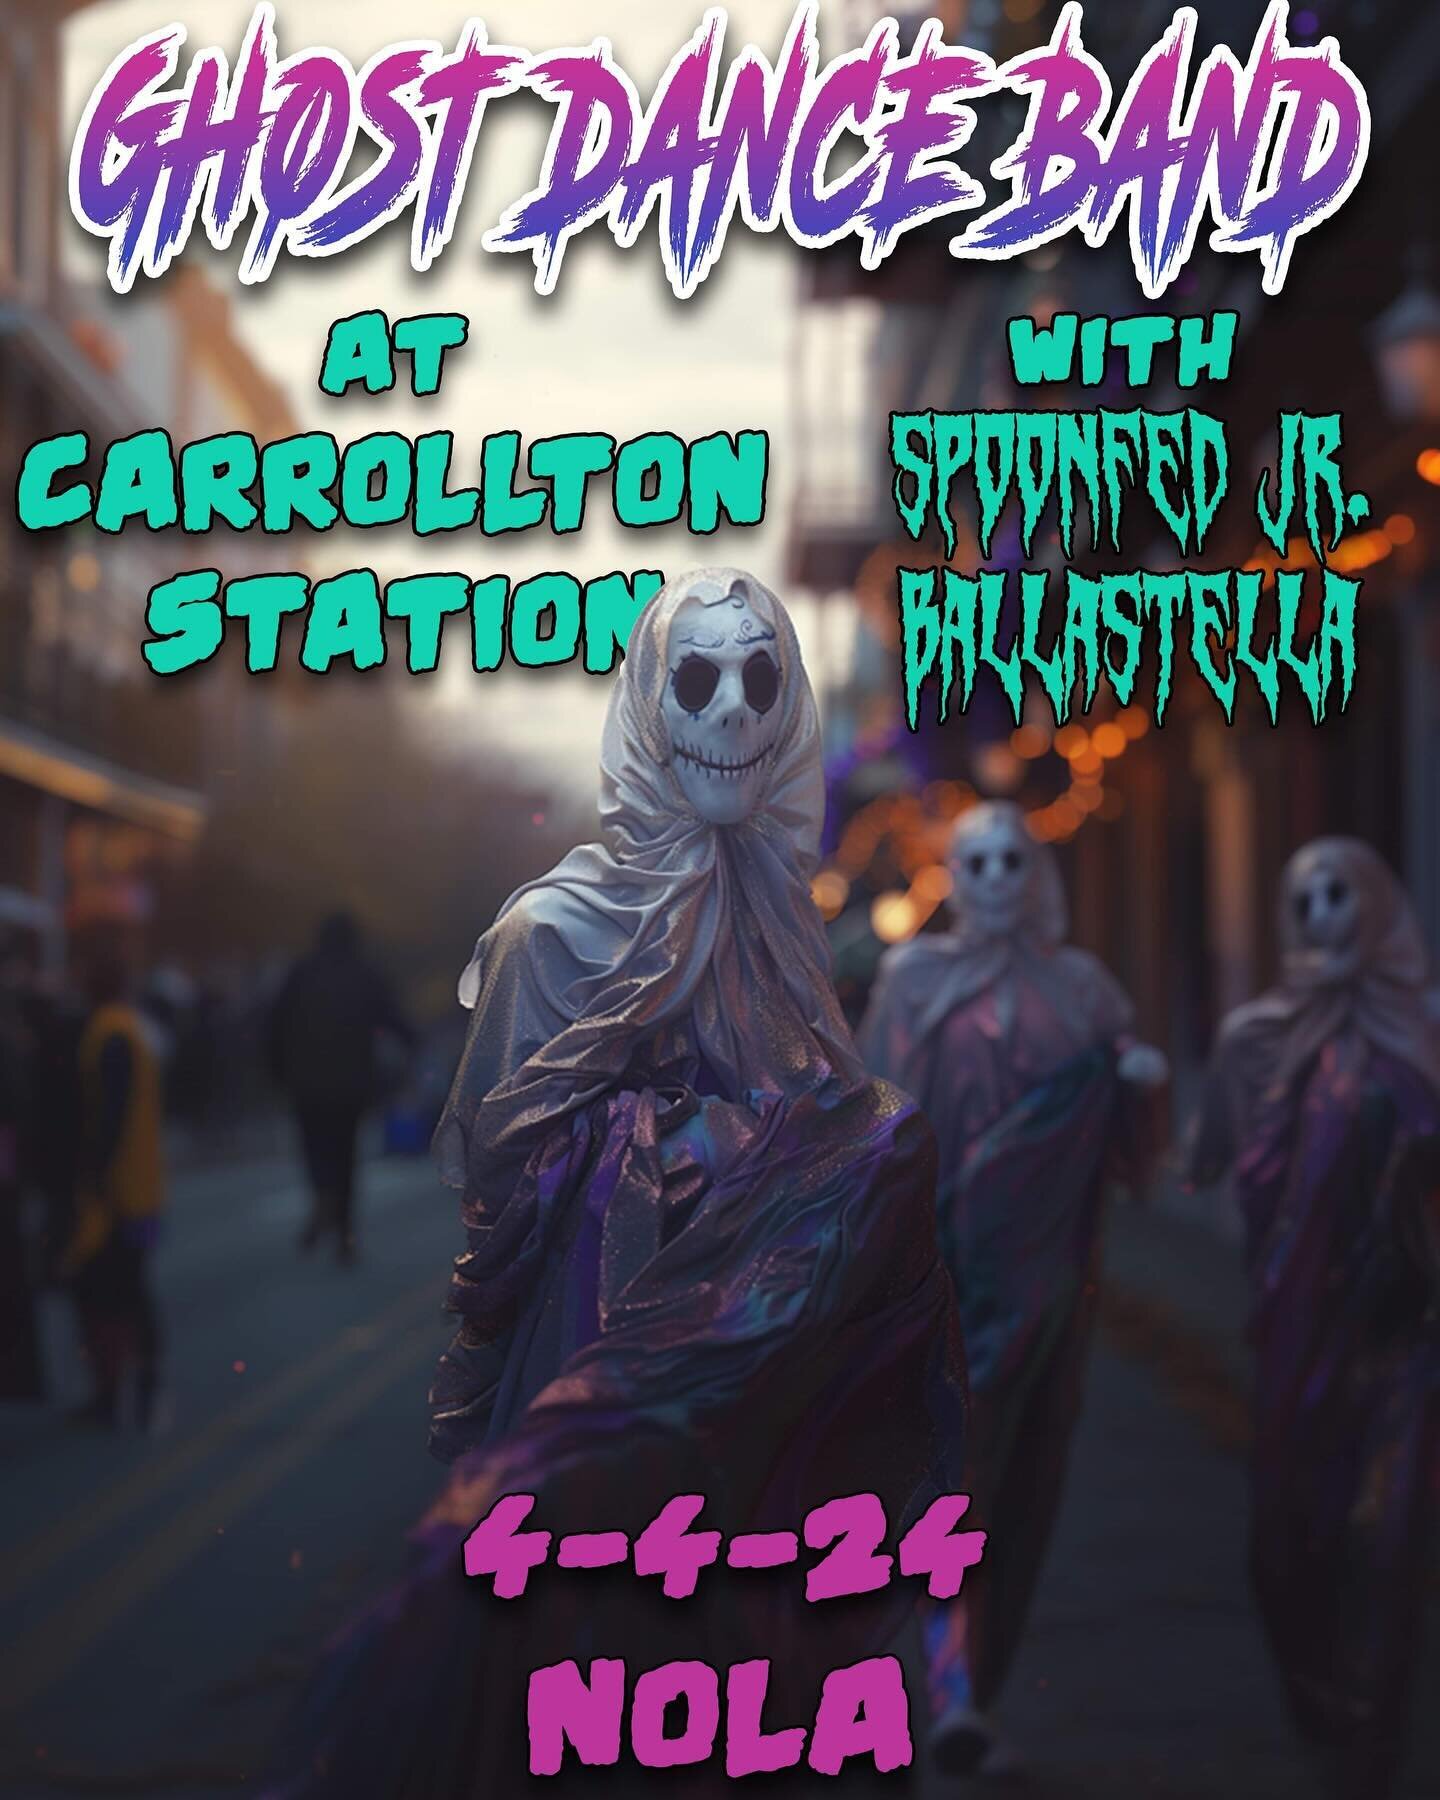 Louisiana! It&rsquo;s goes down the next two days! Tonight we&rsquo;re in New Orleans @carrollton_station  w/ @ballastellamusic and @spoonfed_jr! Doors are 7, music at 8! 

Tomorrow we&rsquo;re down the road in Lafayette @artmosphere_la with Threat a